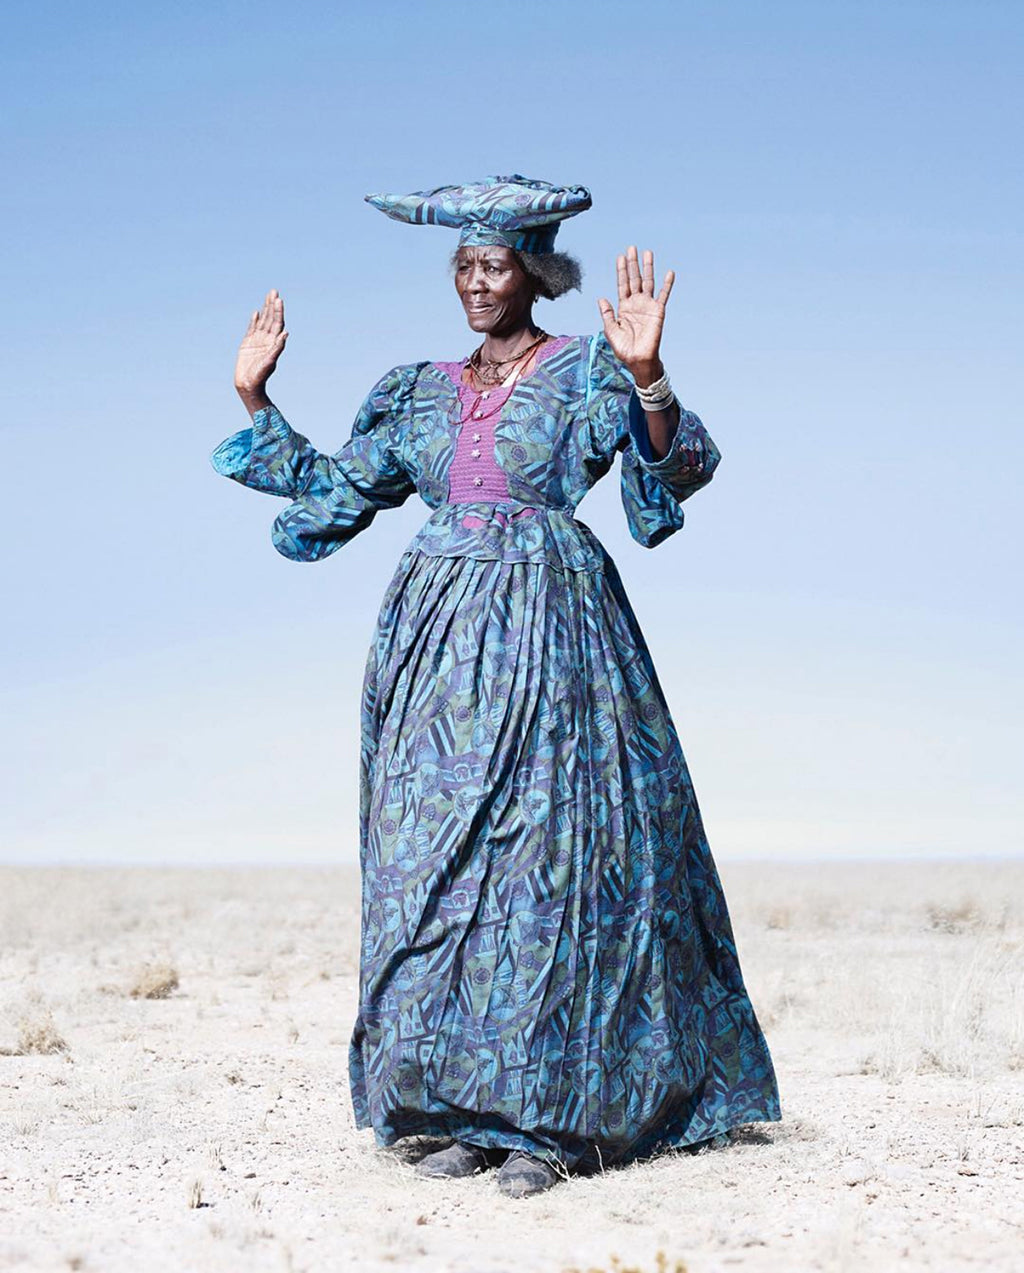 Safari Journal / Blog by Safari Fusion | Victorian style of Namibia | Beautiful imagery of Namibia's Herero people captured by artistic photographer Jim Naughten